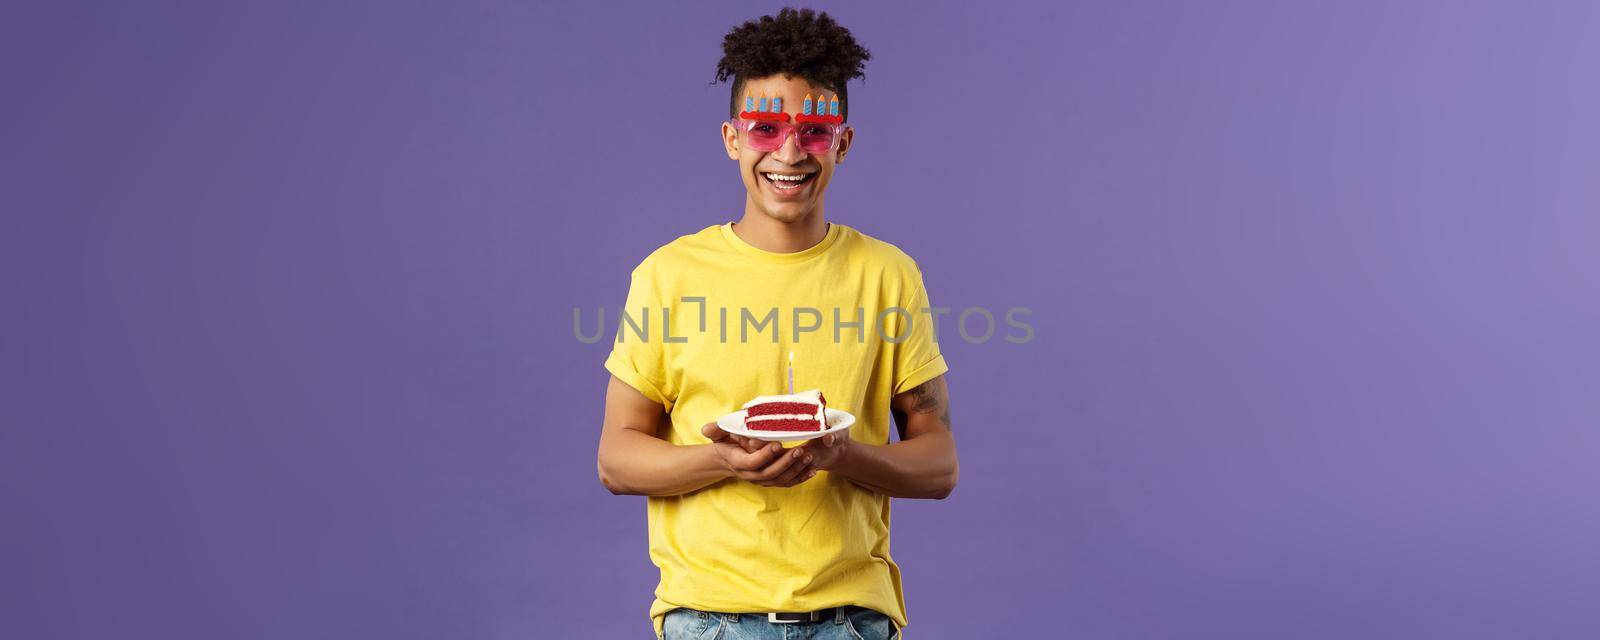 Celebration, party and holidays concept. Portrait of upbeat, charismatic lively man with dreads, hipster guy wearing funny glasses mask celebrating birthday, have fun, hold cake with candle.